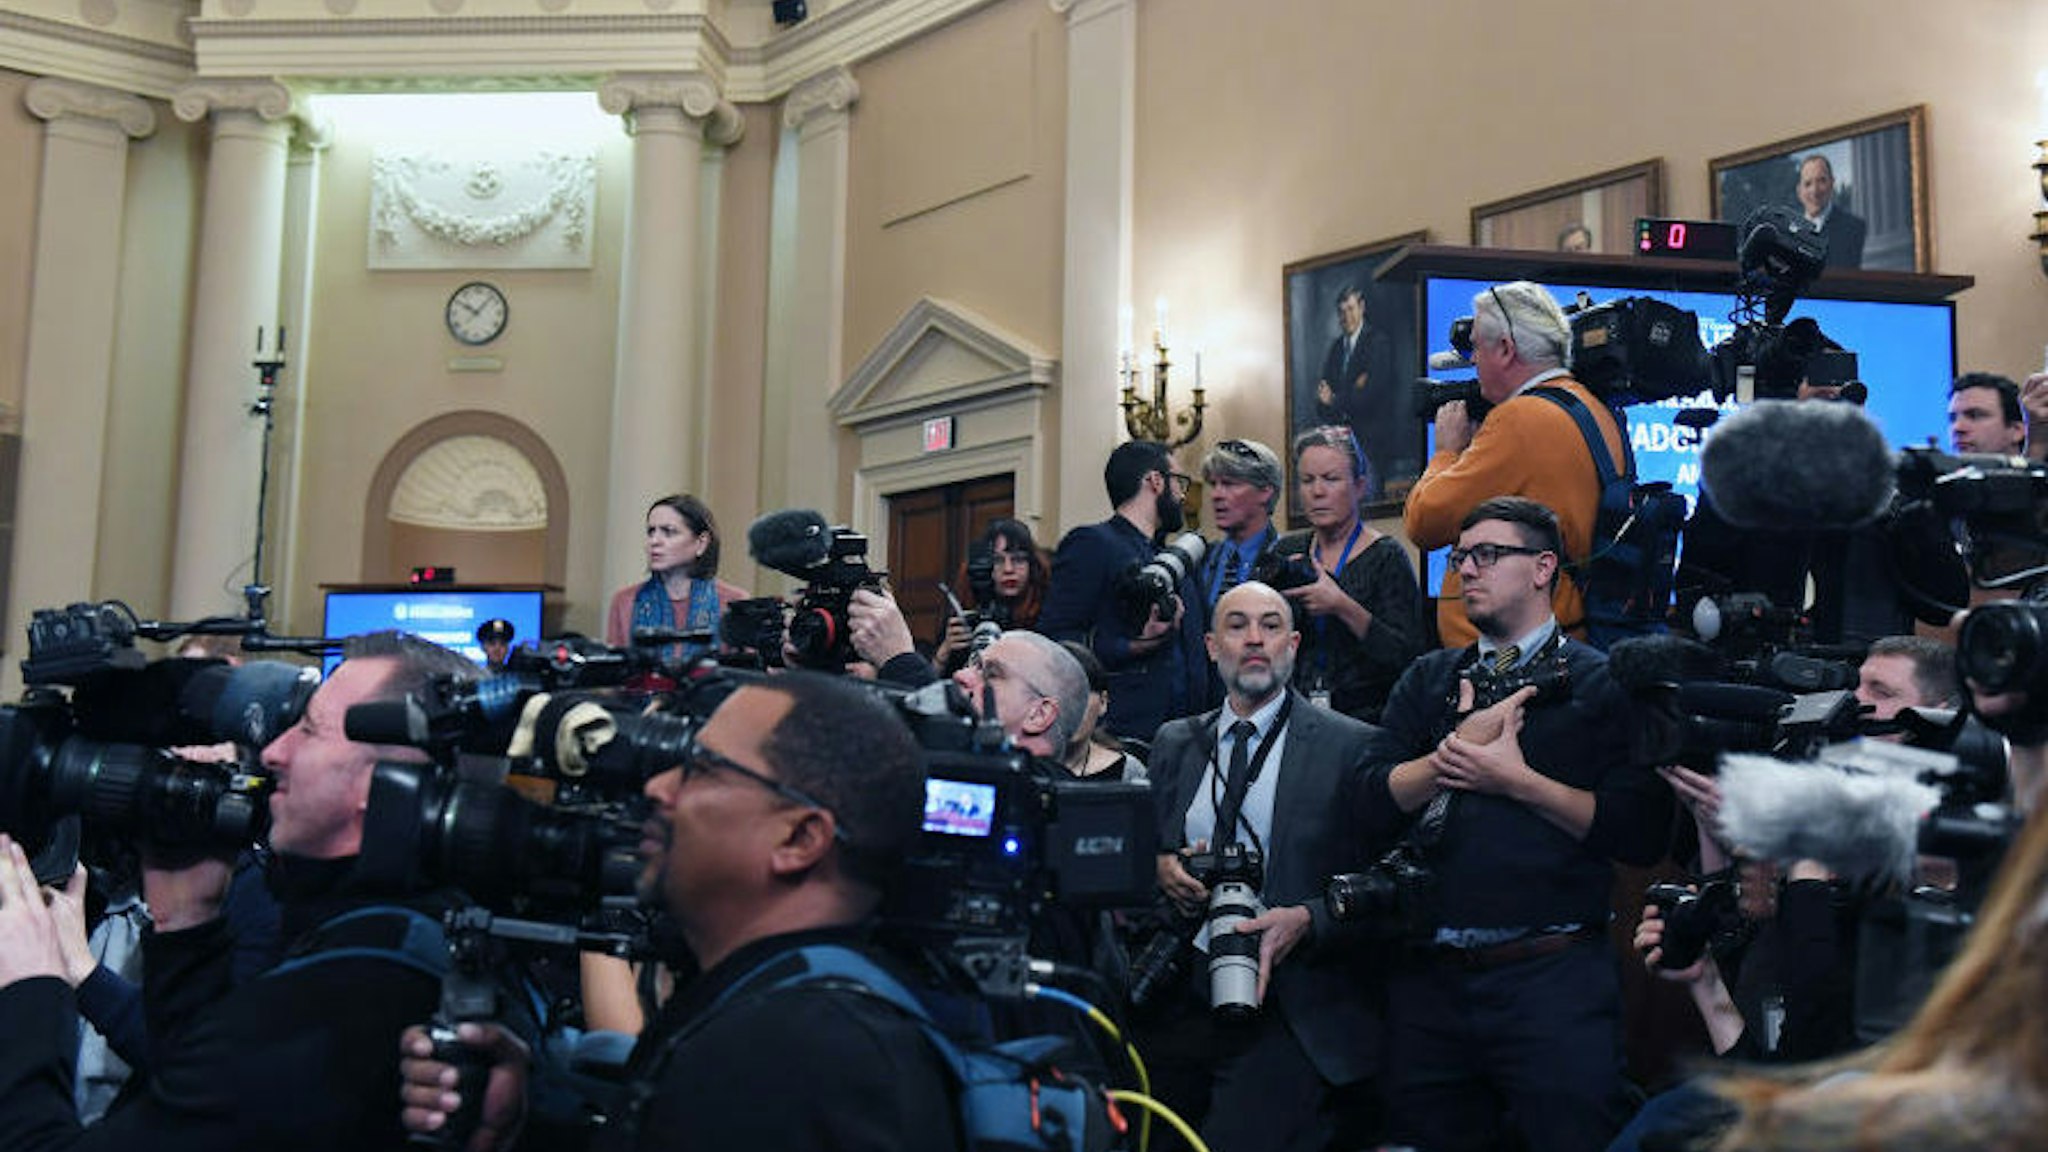 WASHINGTON, DC - NOVEMBER 13: Media members gather as State Department deputy assistant secretary, George Kent and acting U.S. ambassador to Ukraine, William B. Taylor appear for a House Intelligence Committee impeachment hearing in the Longworth House Office Building on Wednesday November 13, 2019 in Washington, DC.